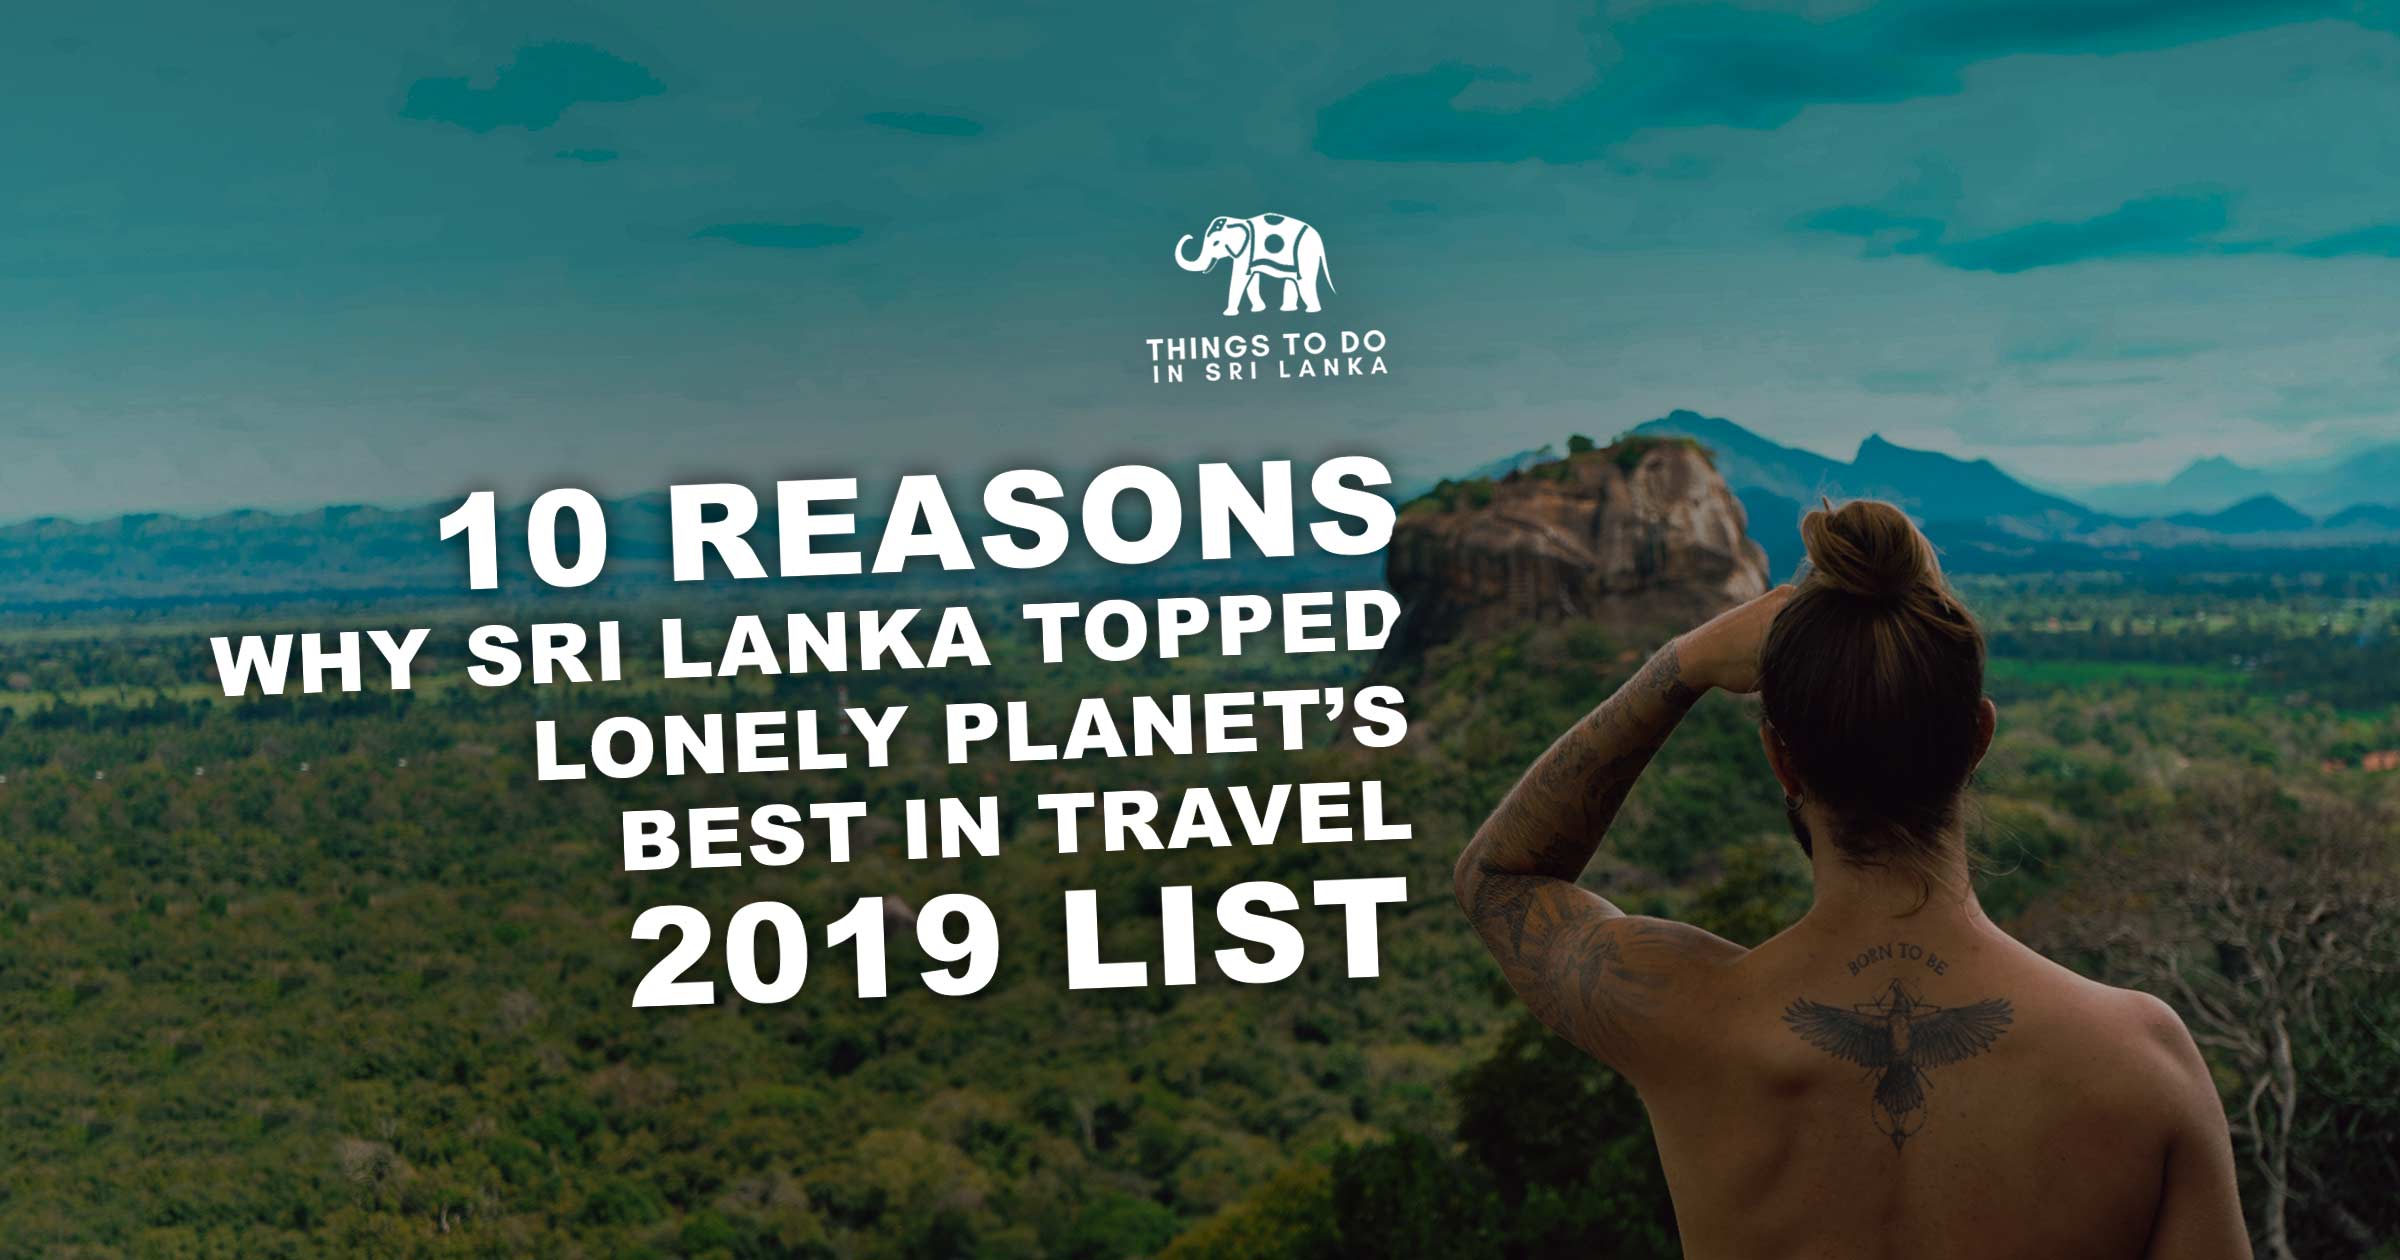 10 Reasons why Sri Lanka topped Lonely Planet’s Best in Travel 2019 list